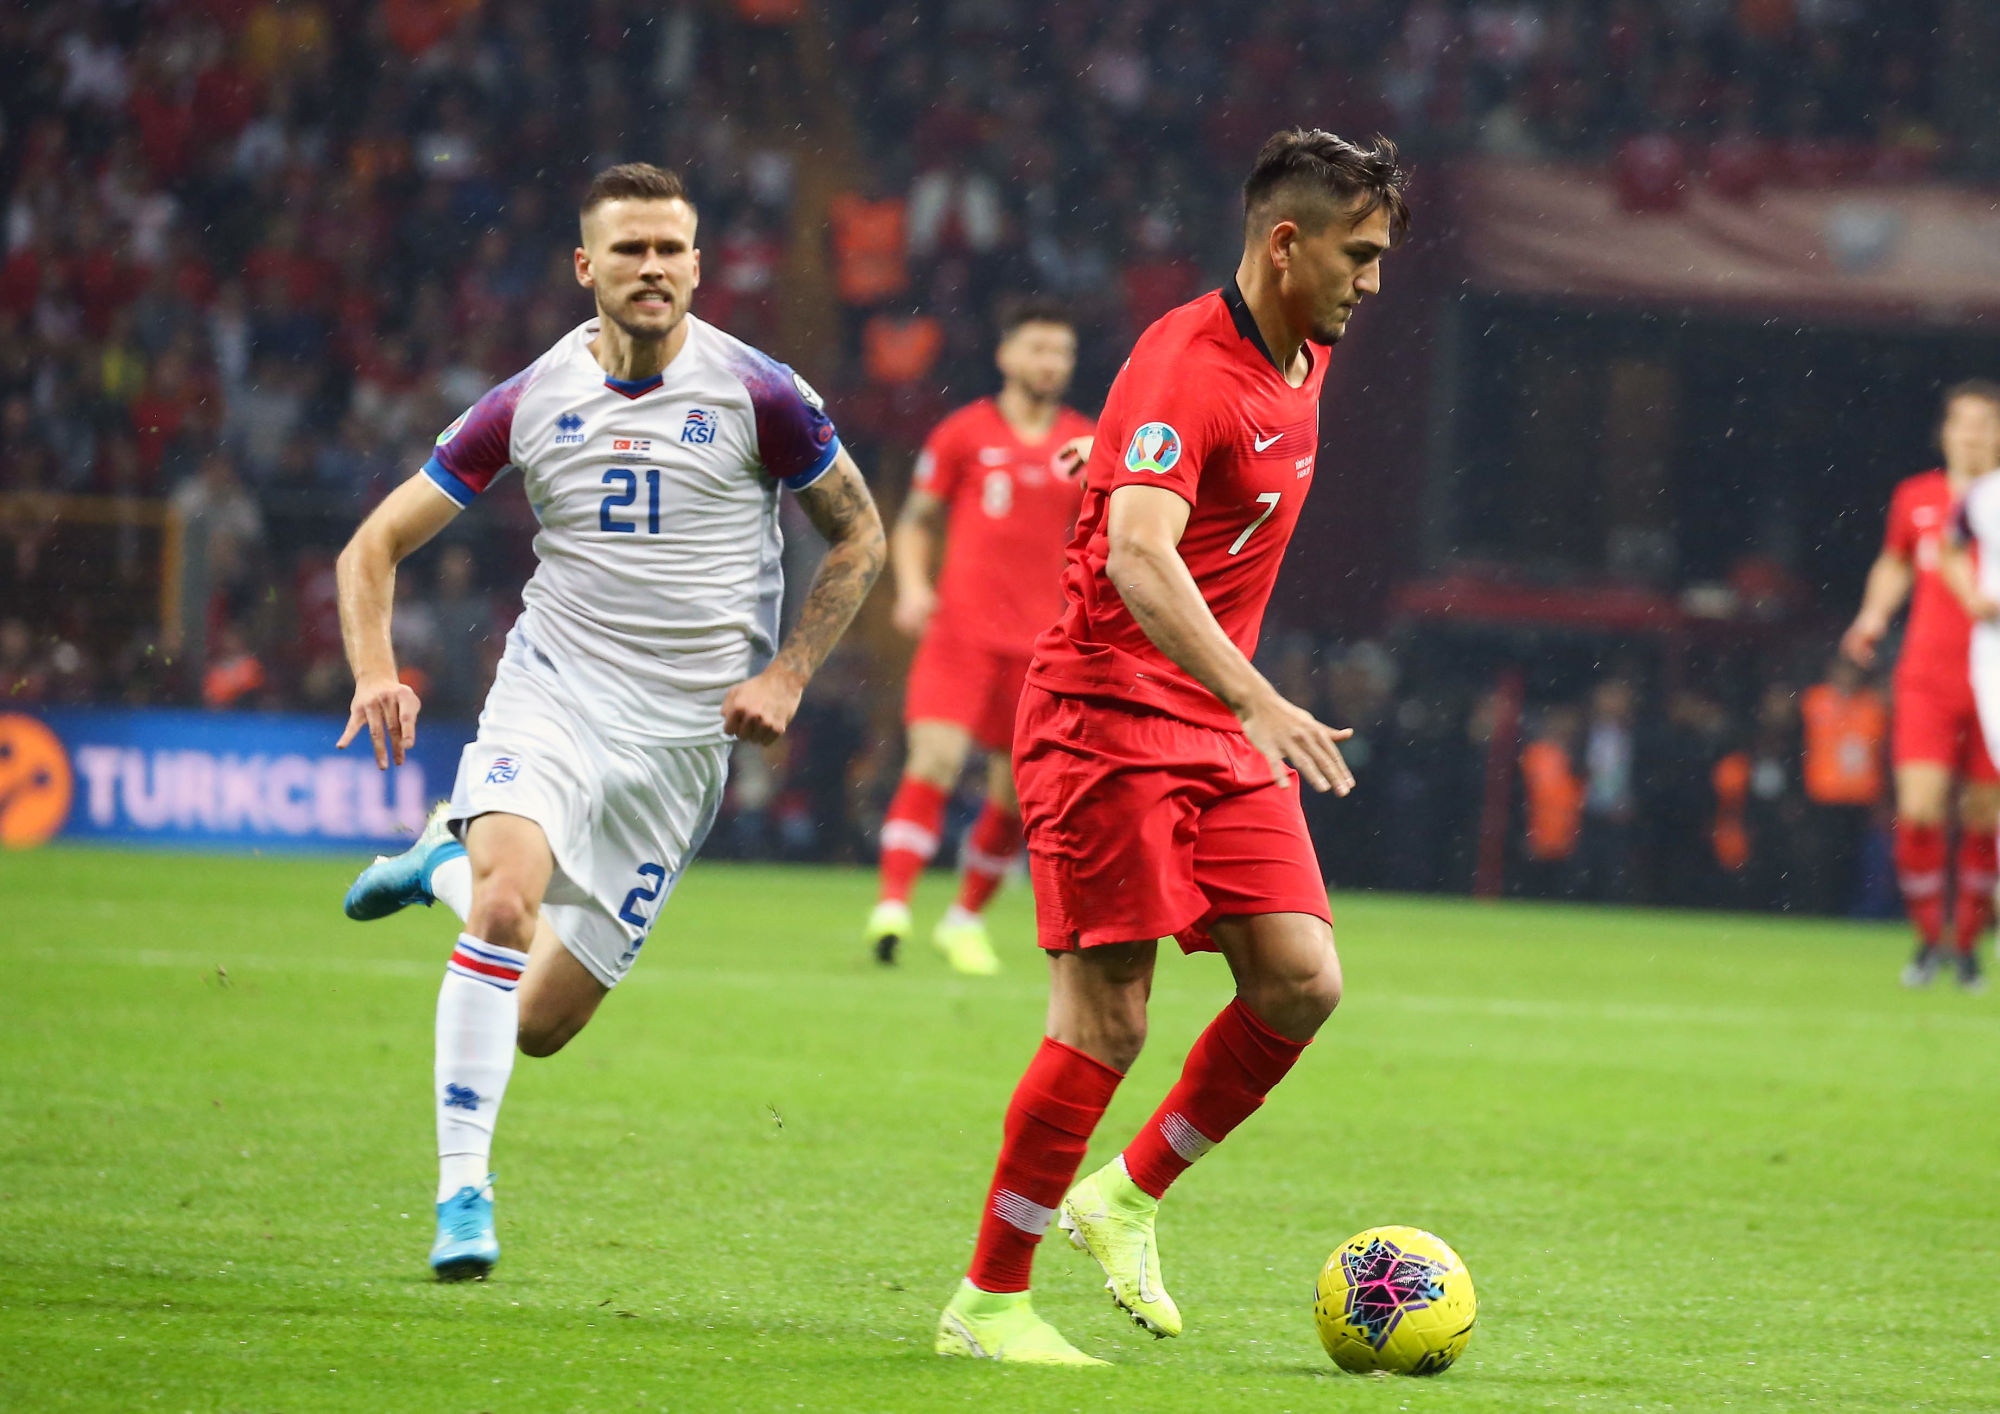 Cengiz Under (R) of Turkey and  Arnor Traustason #21 of Iceland during the European Championship qualification Group H Match between Turkey and Iceland at the Turk Telekom Stadium in Istanbul , Turkey on  November 14 , 2019. 

Photo by Icon Sport - Turk Telekom Arena - Istanbul (Turquie)